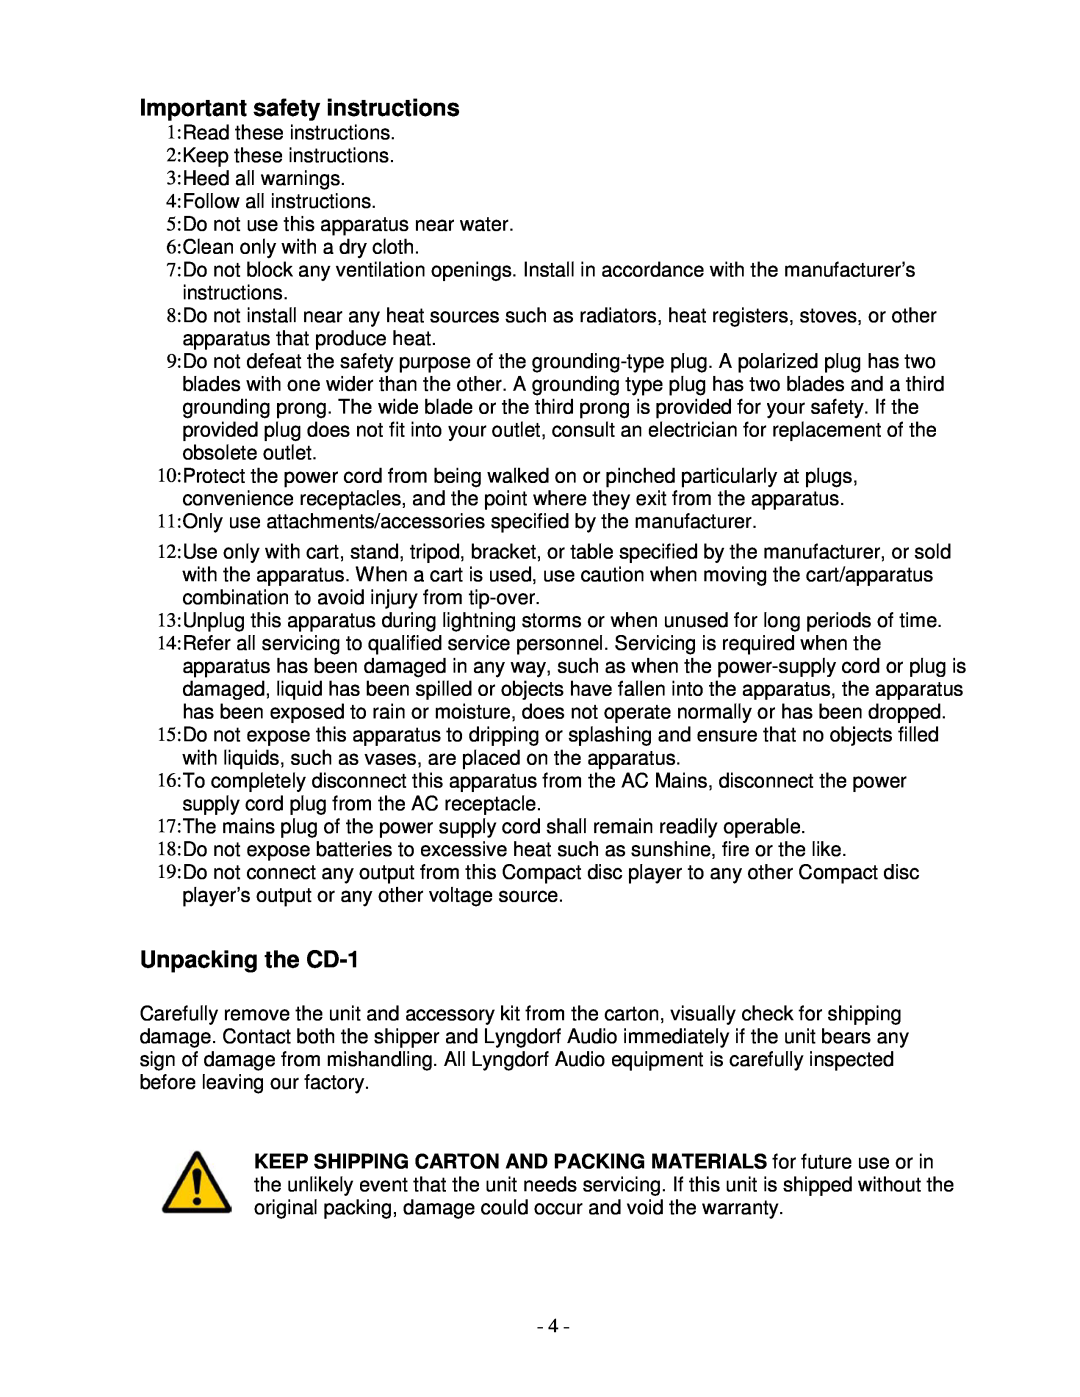 Lyngdorf Audio owner manual Important safety instructions, Unpacking the CD-1 